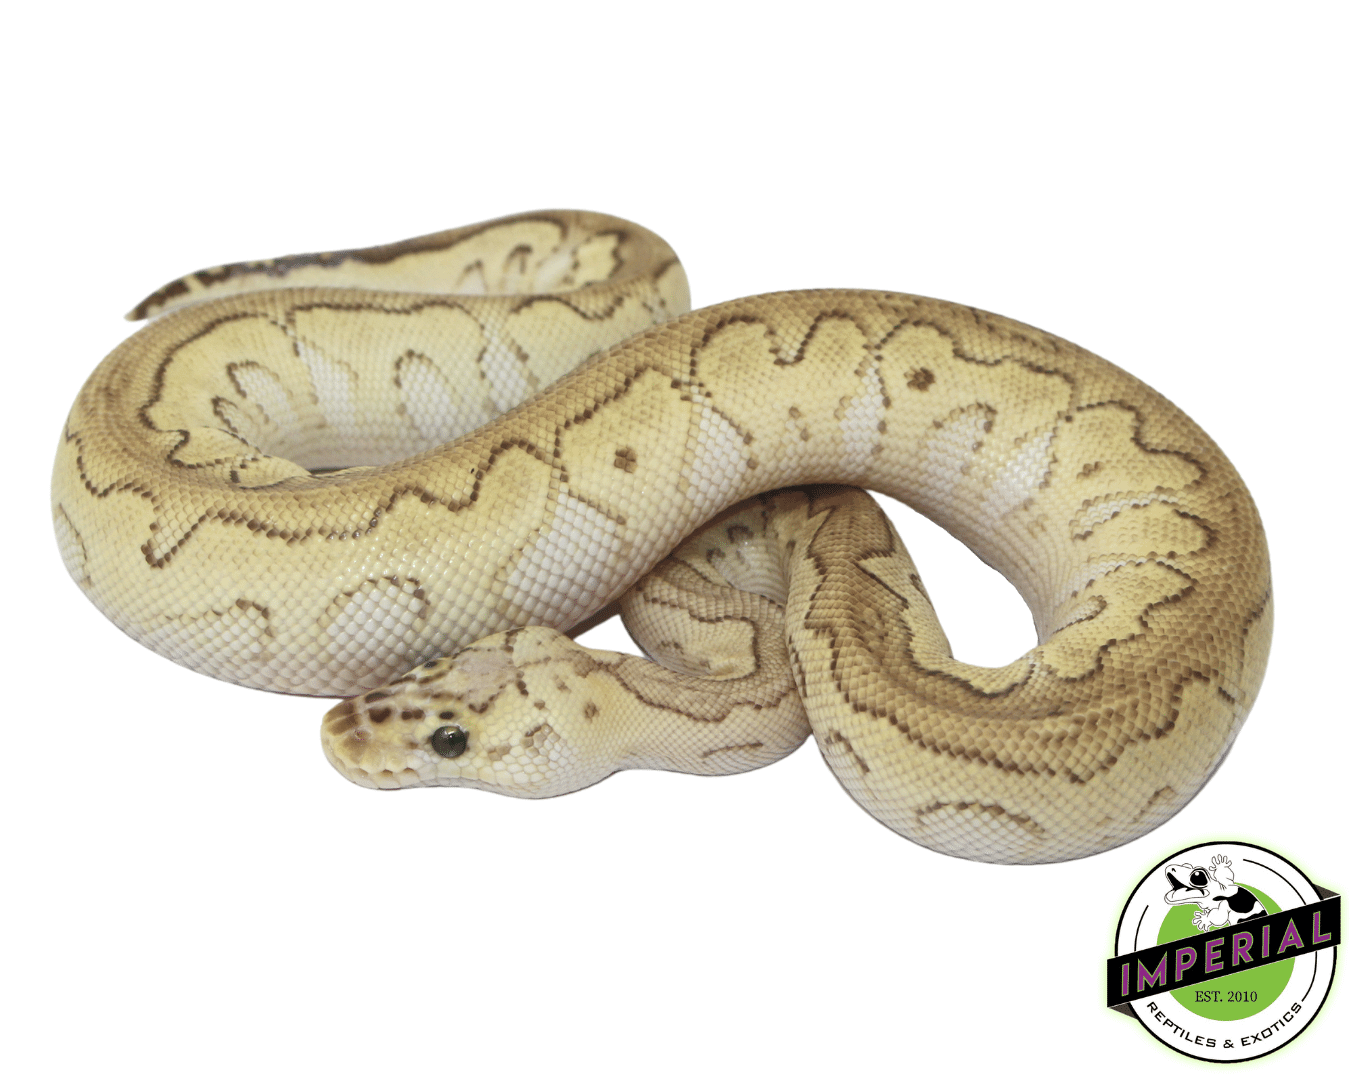 Pastel Butter Clown ball python for sale, buy reptiles online